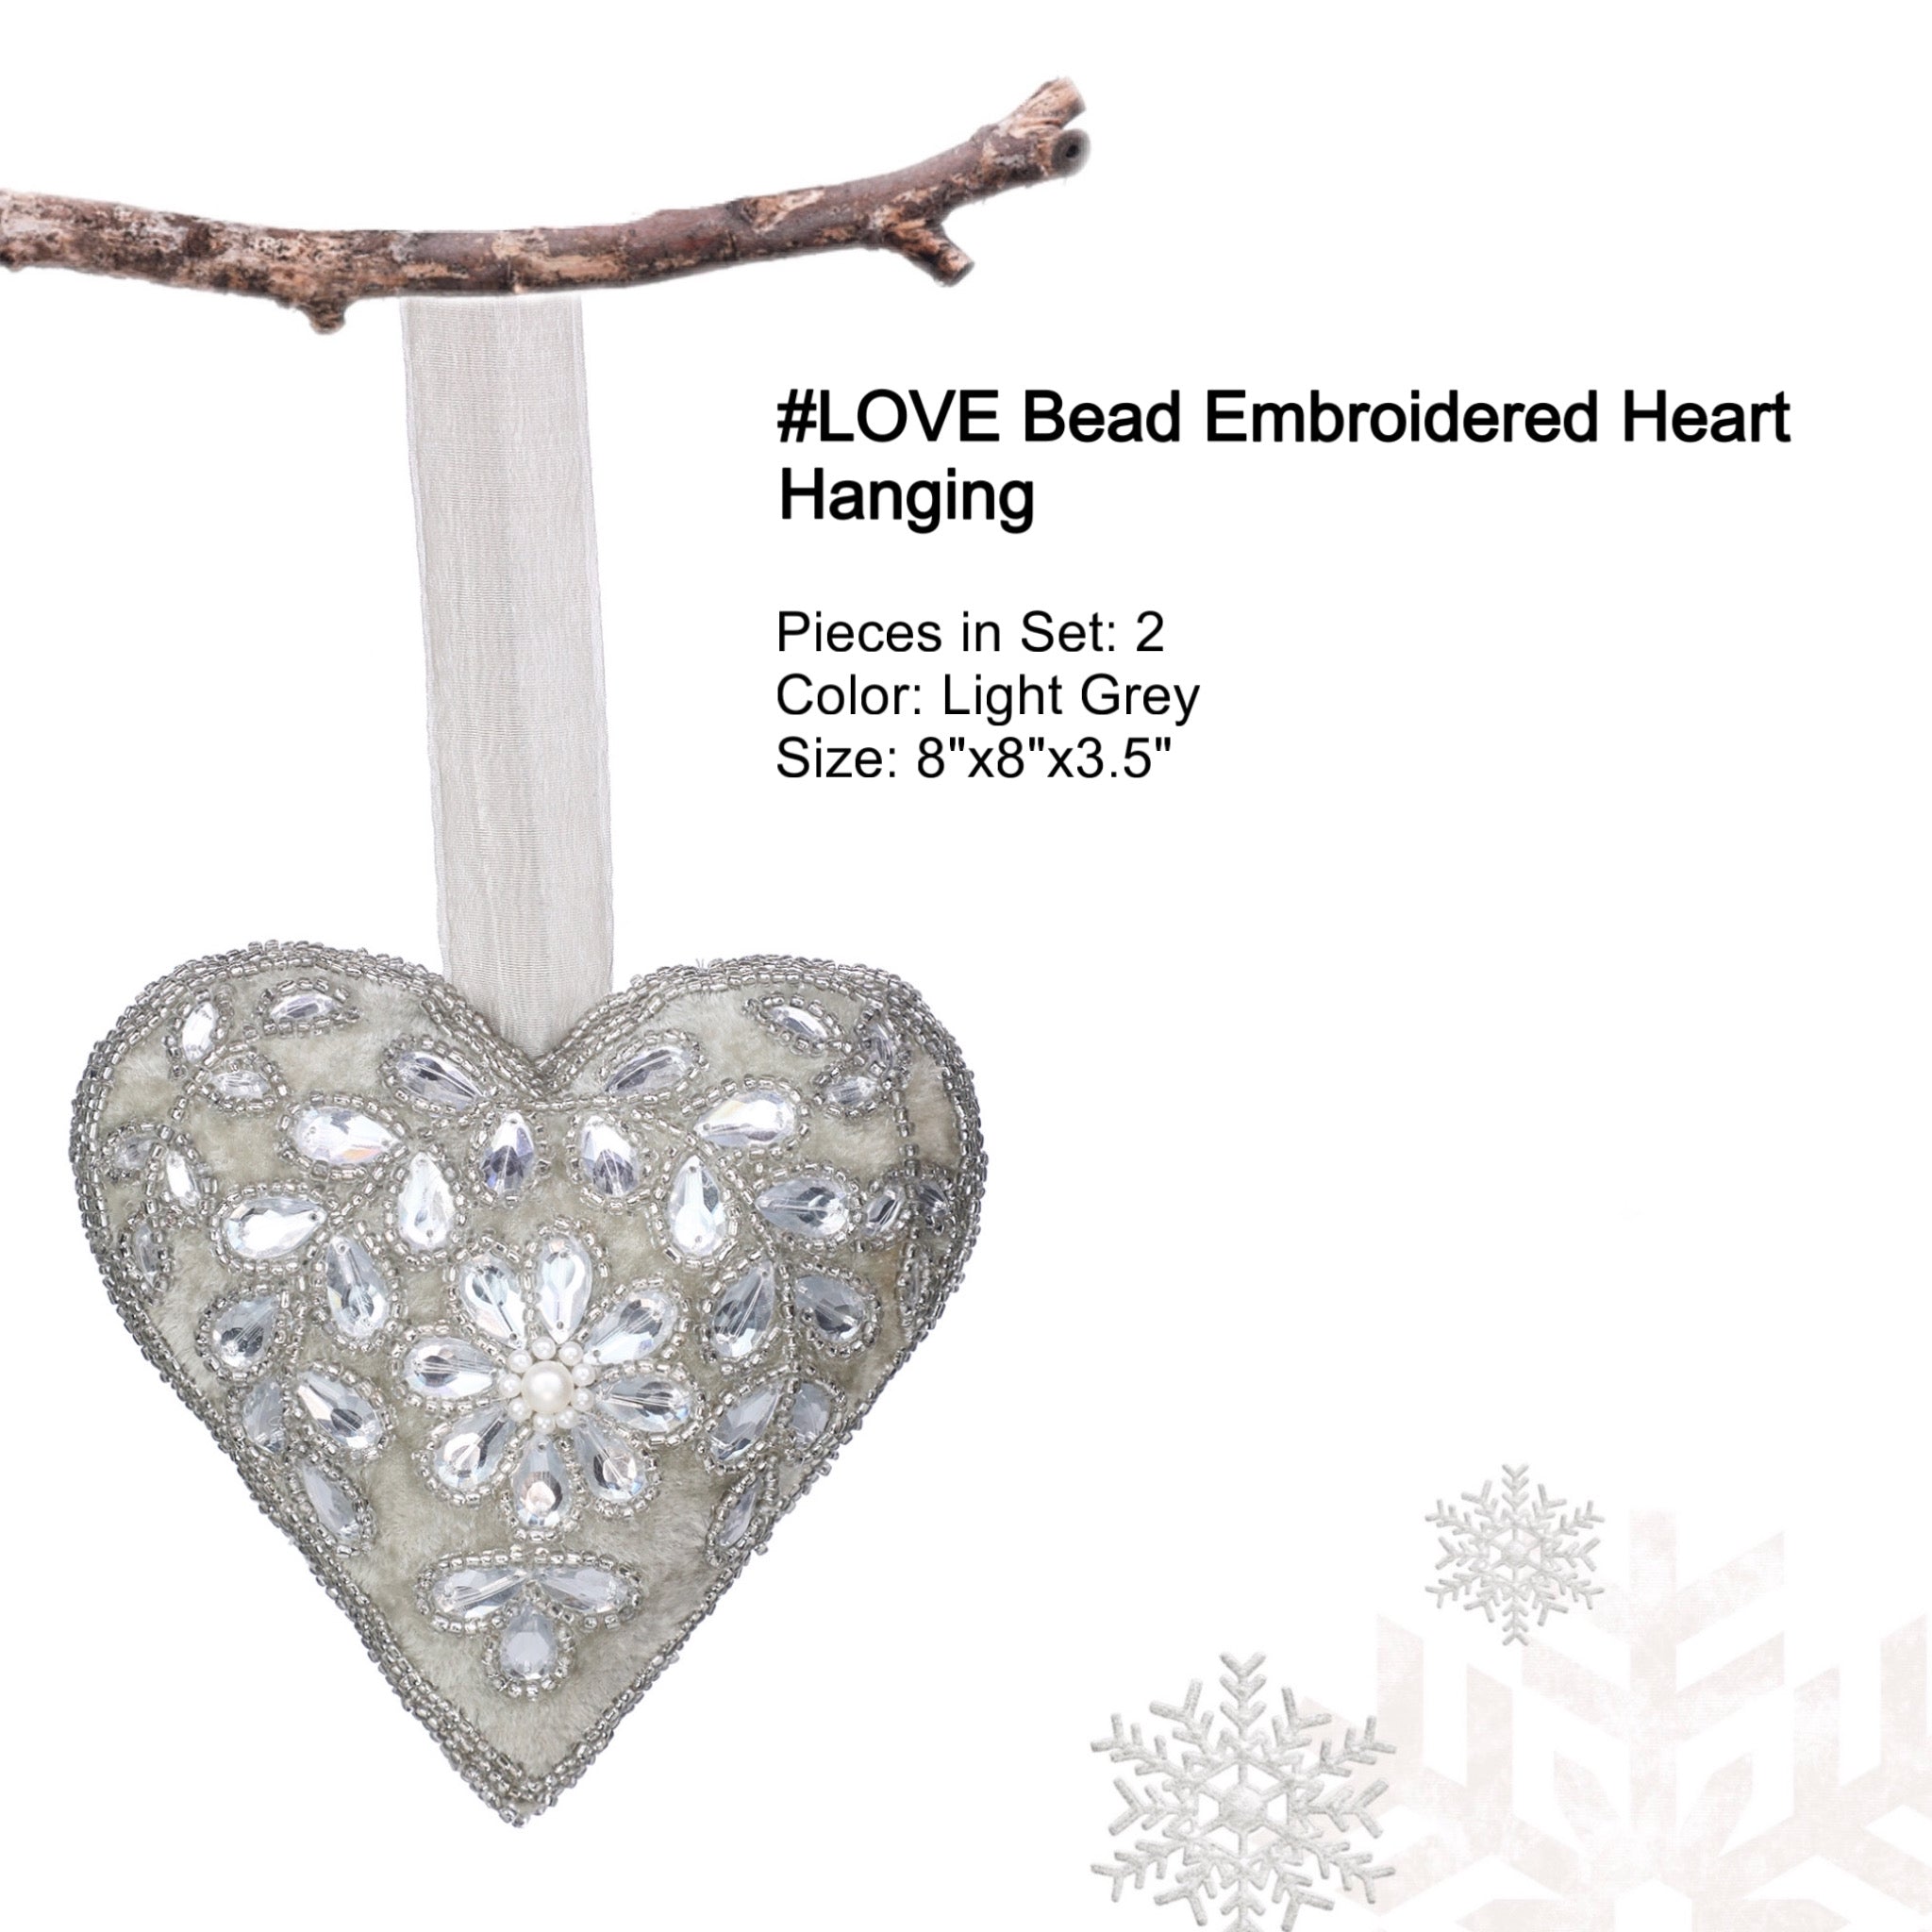 #LOVE Bead Embroidered Heart Hanging in Light Grey, Set of 2